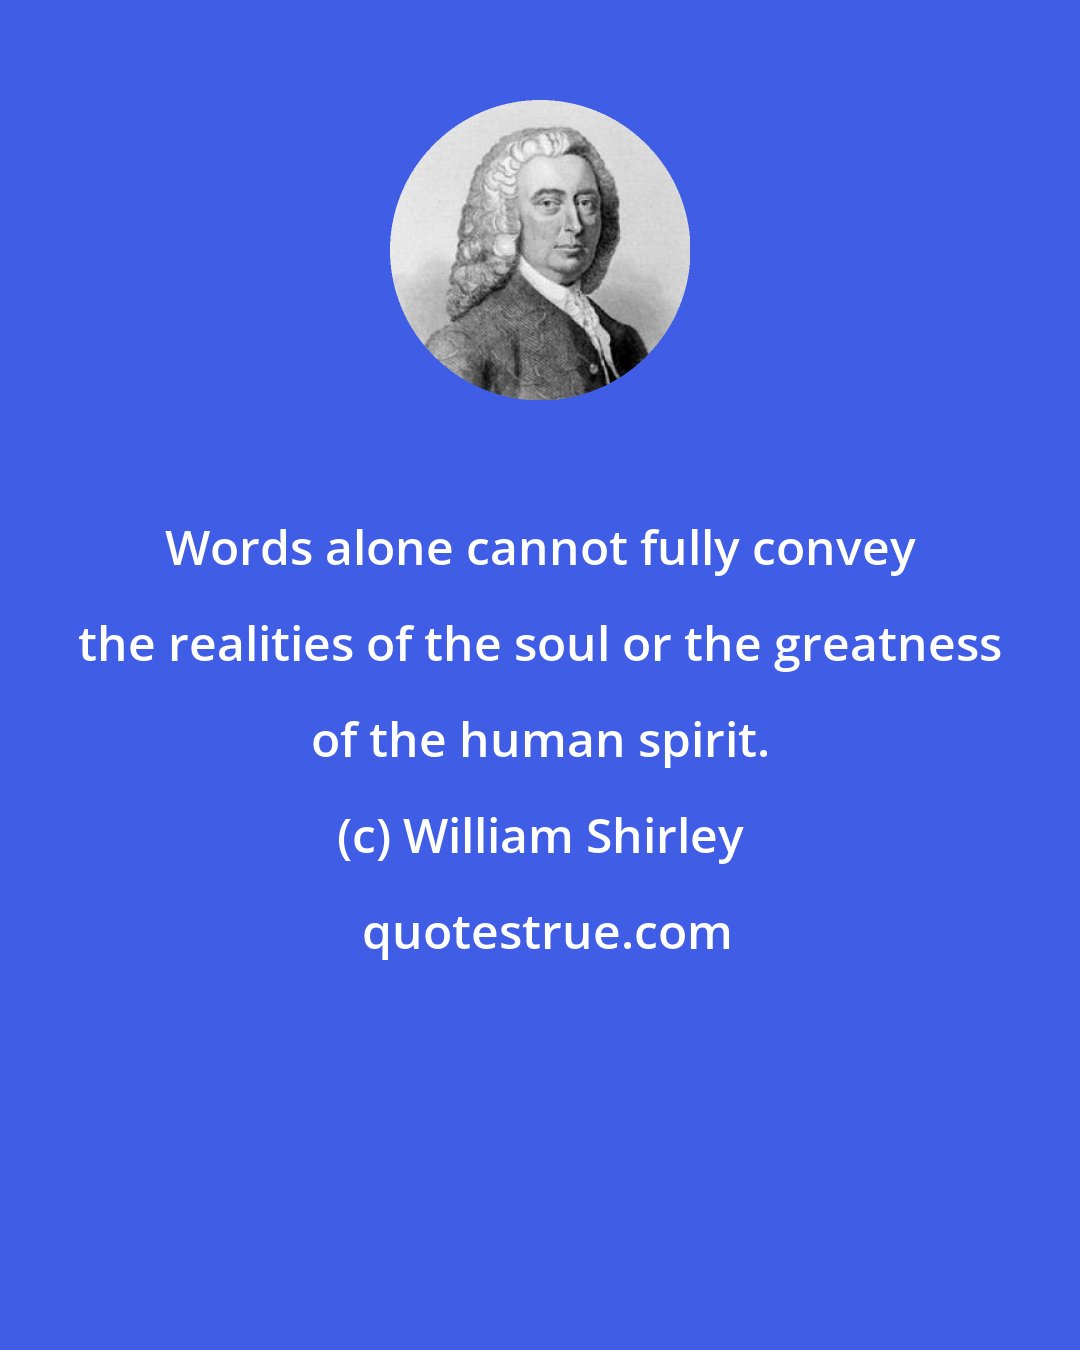 William Shirley: Words alone cannot fully convey the realities of the soul or the greatness of the human spirit.